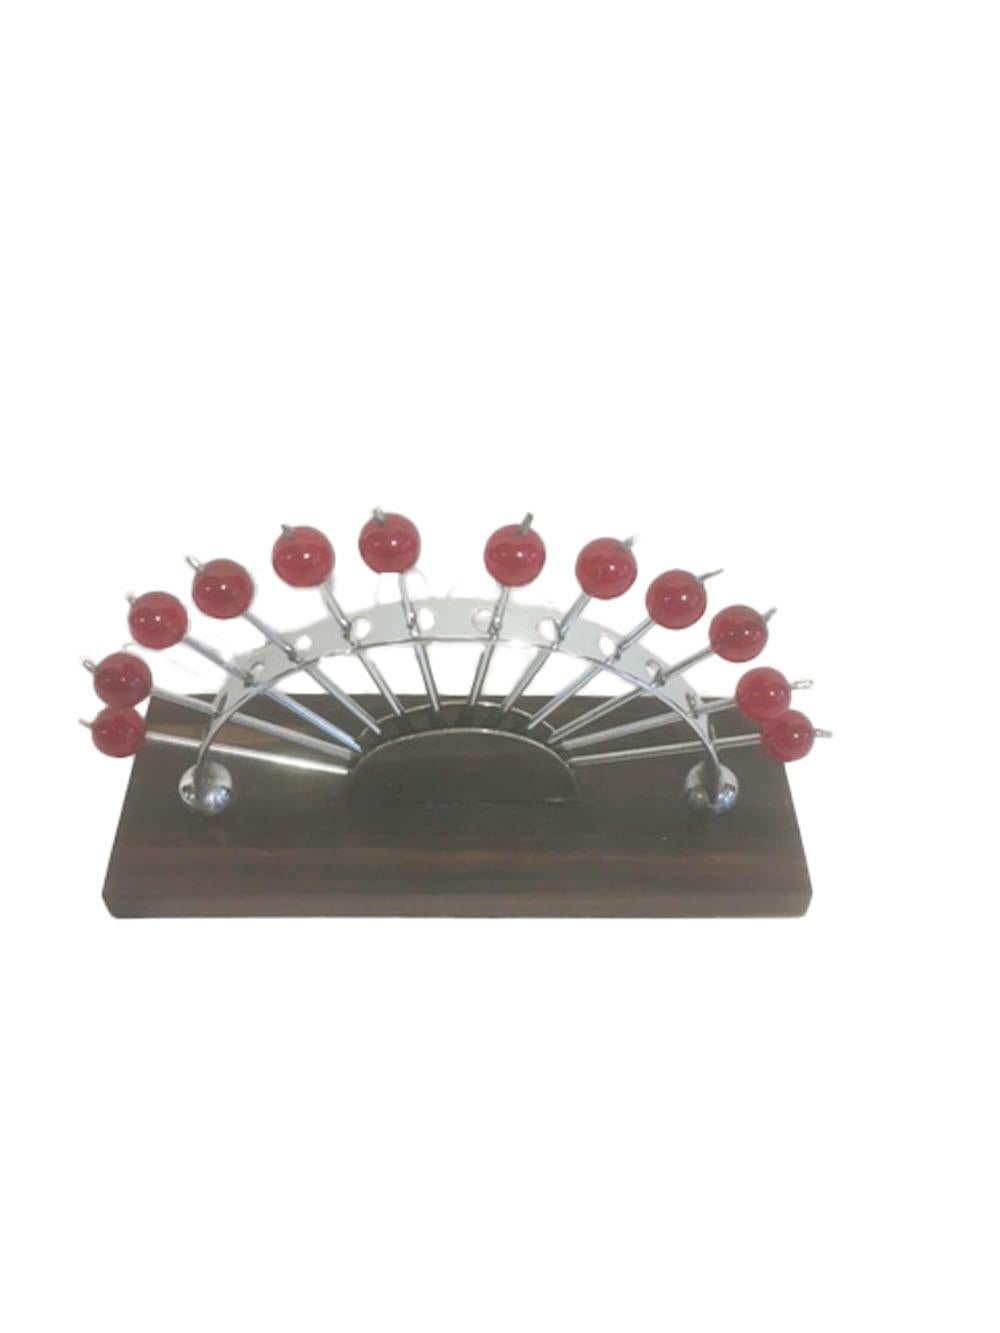 French 12 Art Deco Cocktail Picks with Cherry Red Tops in a Chrome Fan-Form Stand For Sale